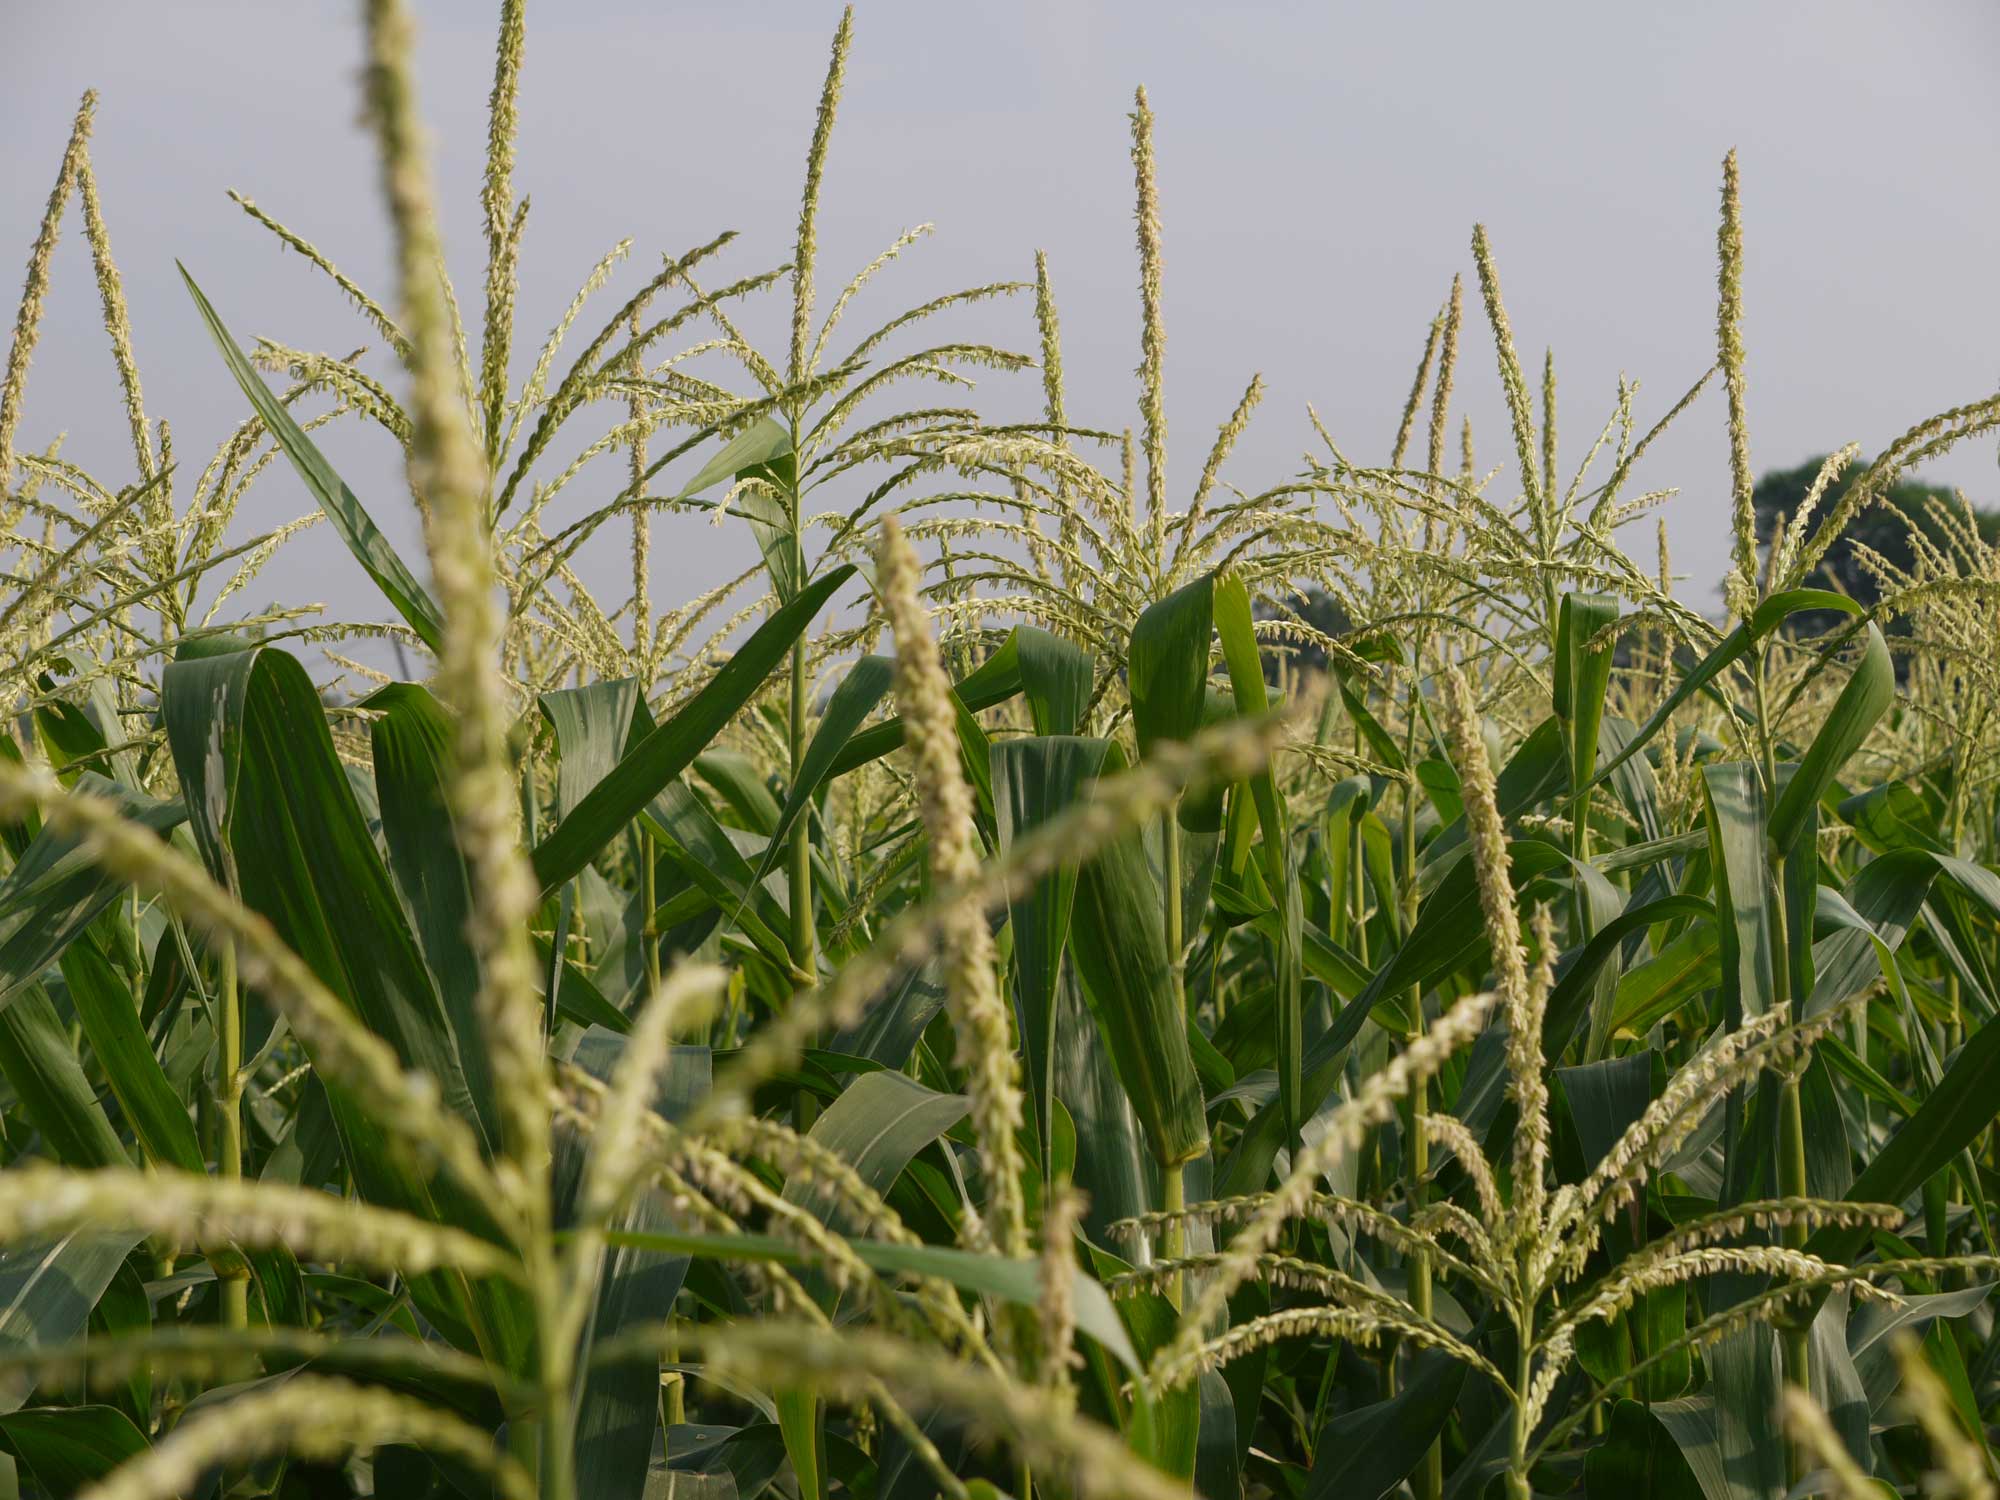 Photograph of the tassels of maize plants growing in a field.